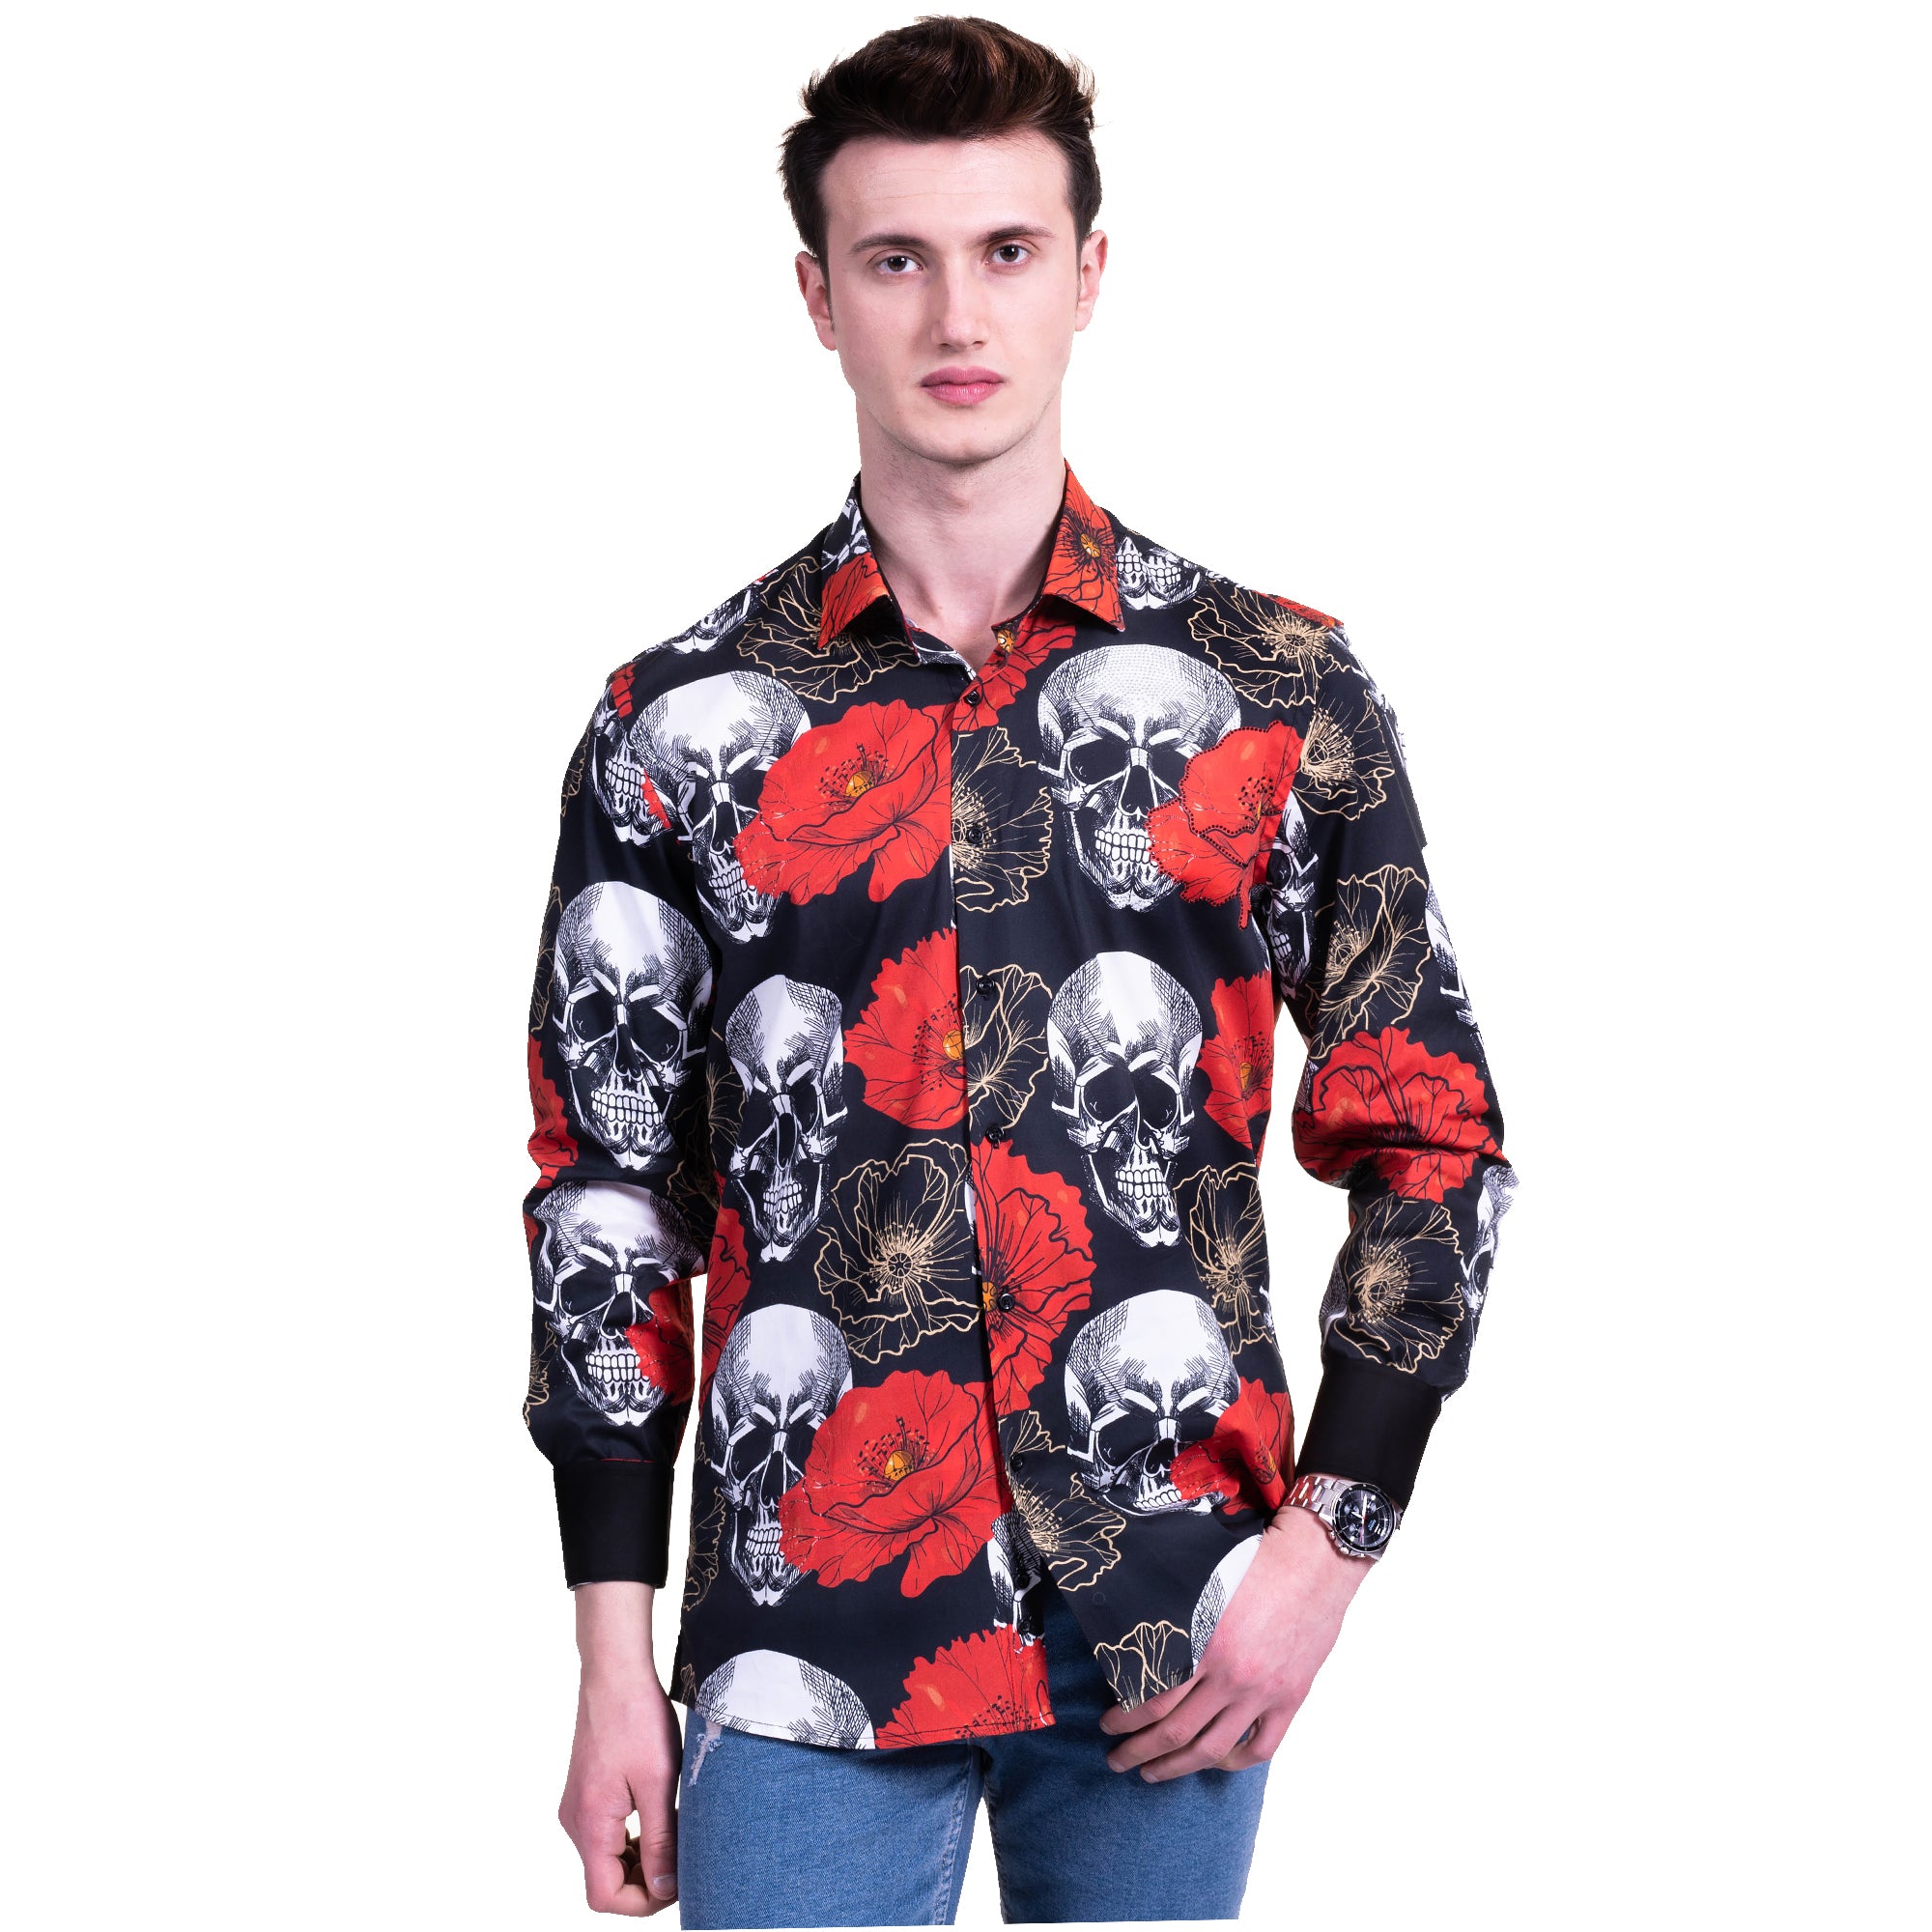 Black, Red and White Skulls Mens Slim French Cuff Shirt - – Amedeo Exclusive